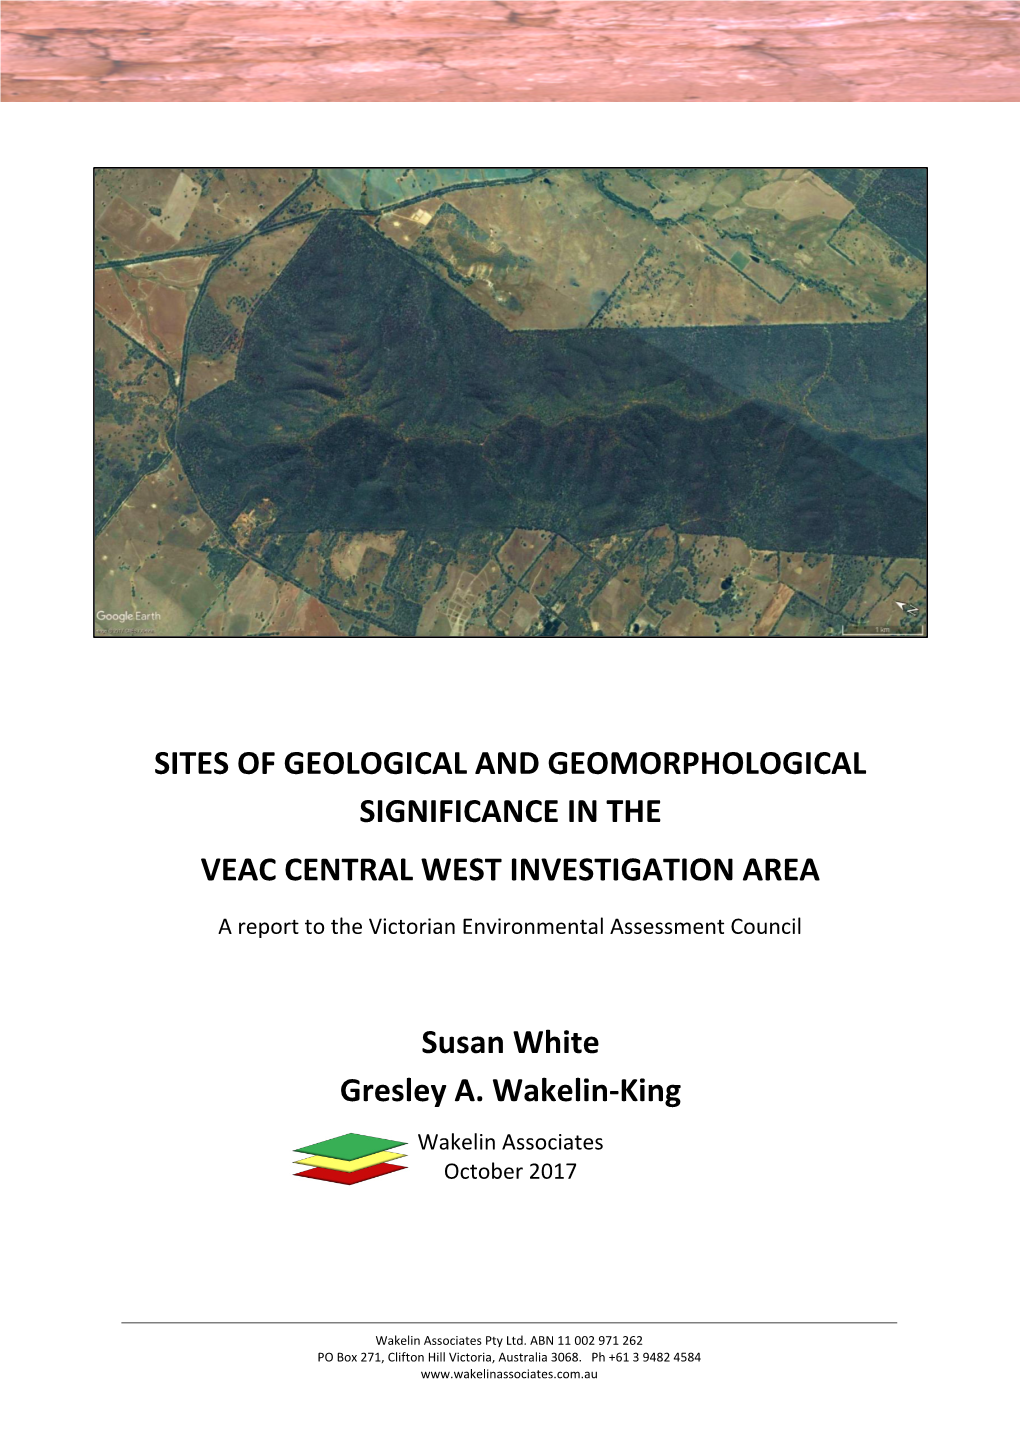 Sites of Geological and Geomorphological Significance in the Veac Central West Investigation Area